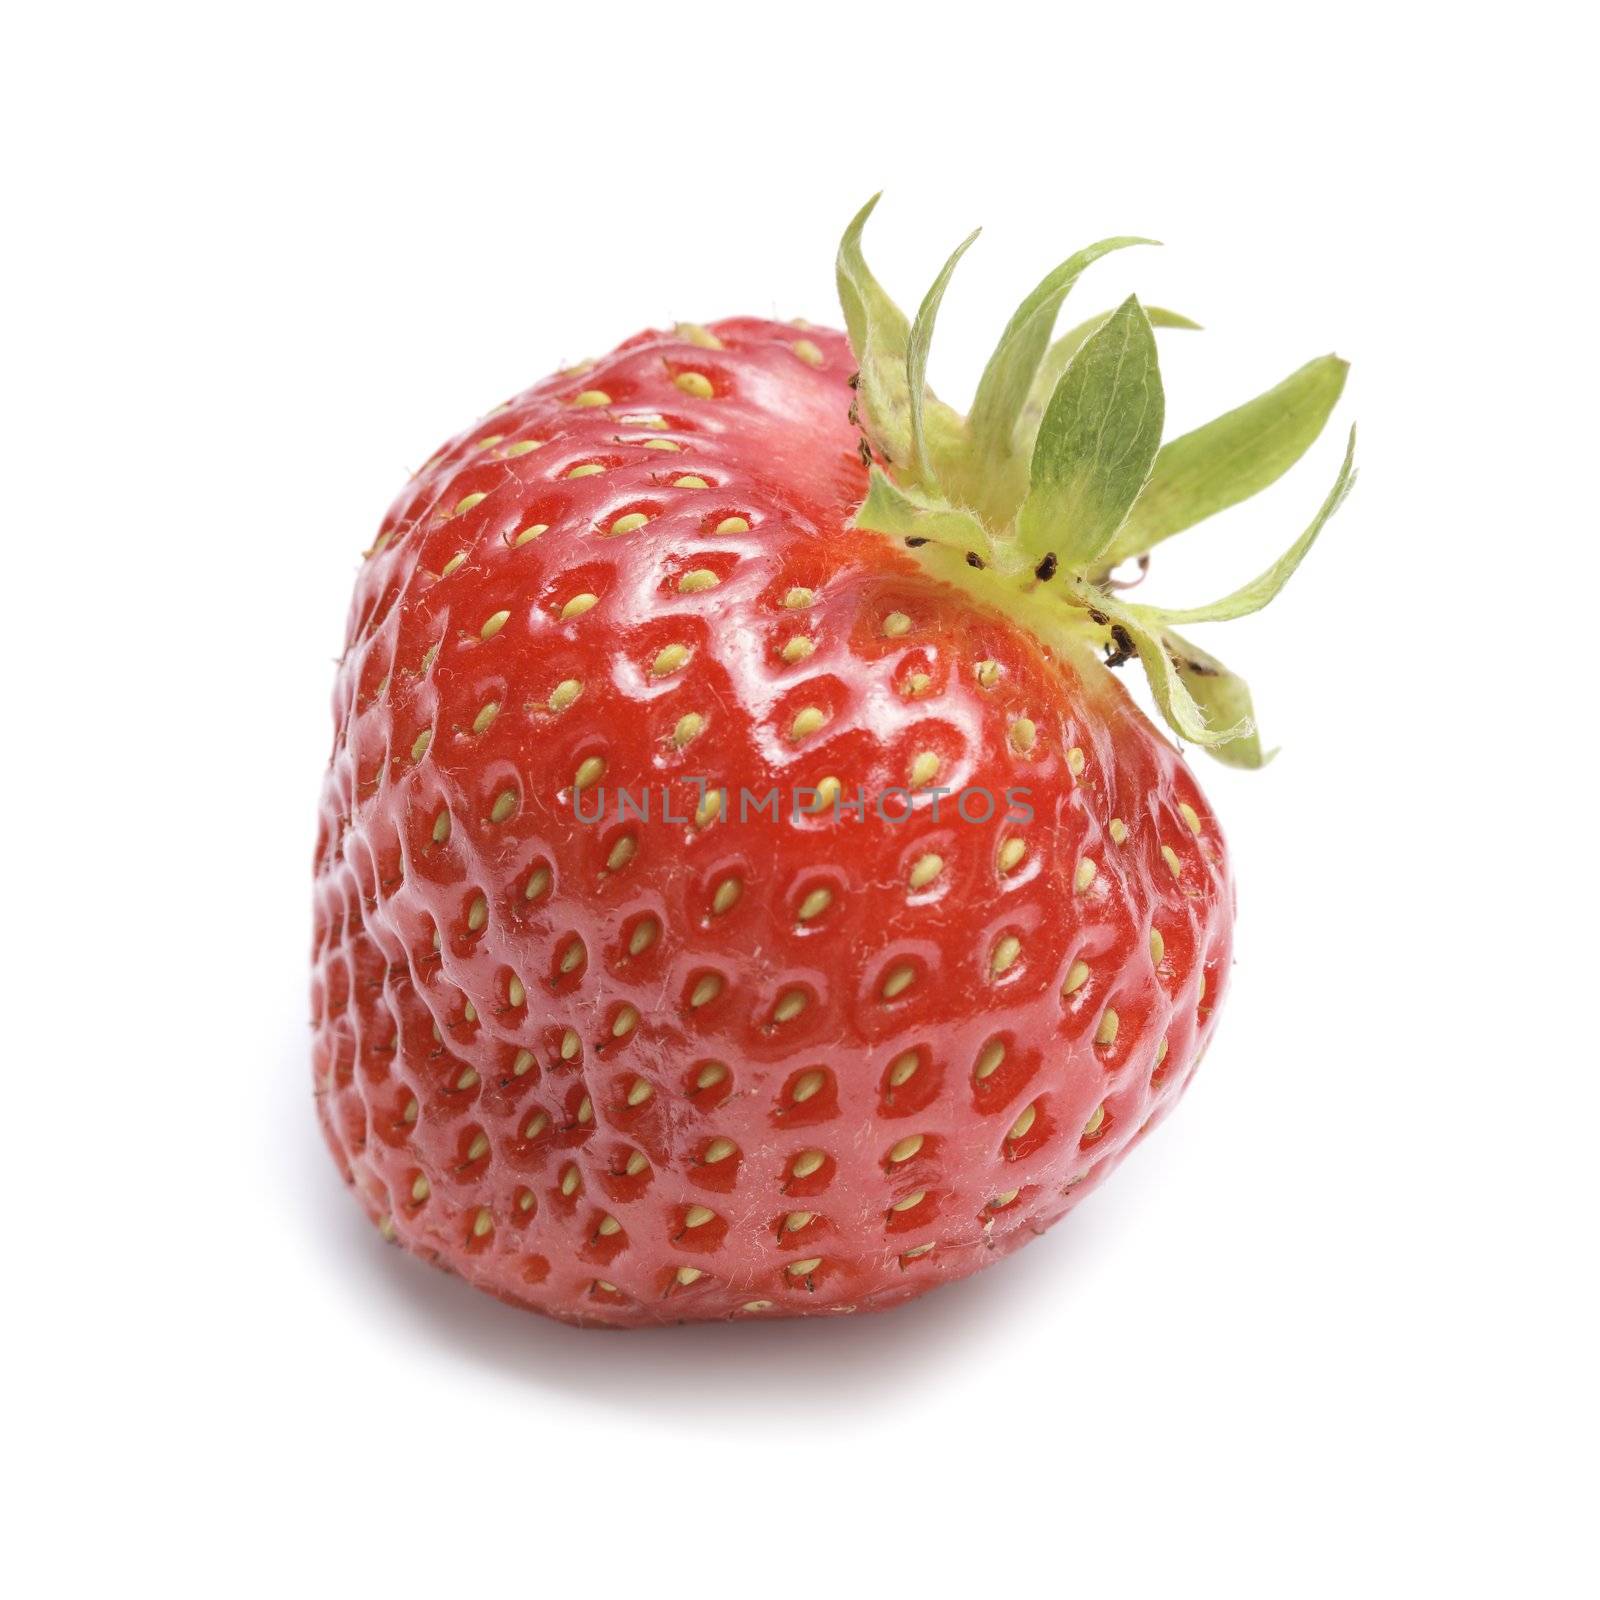 Strawberry isolated on white with shadow